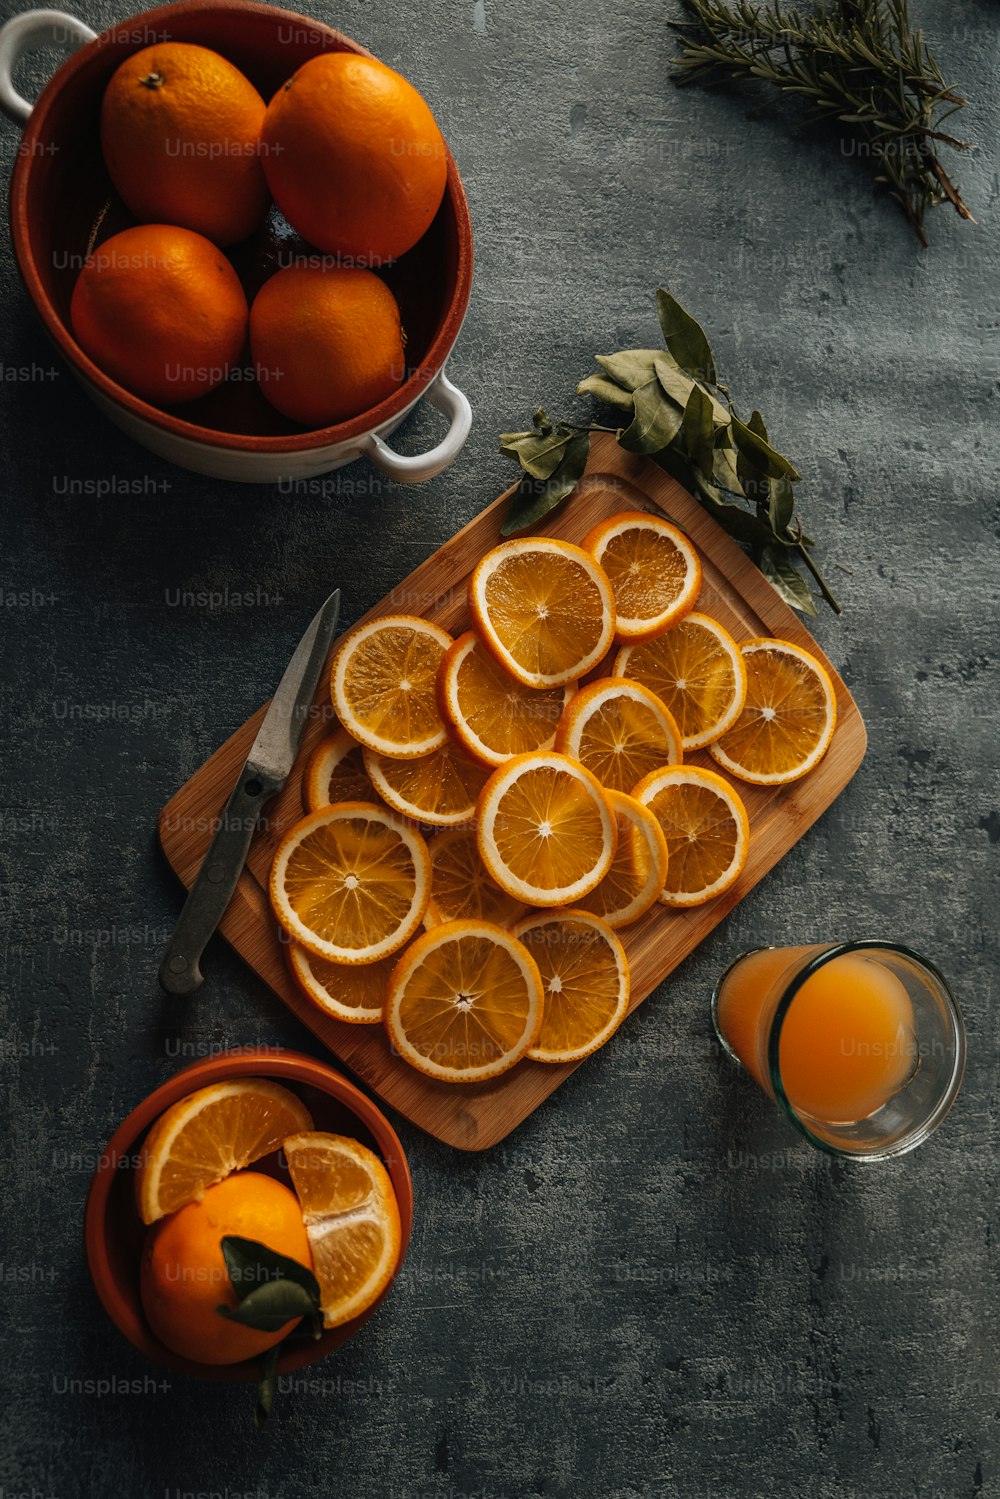 a cutting board topped with sliced oranges next to a bowl of oranges